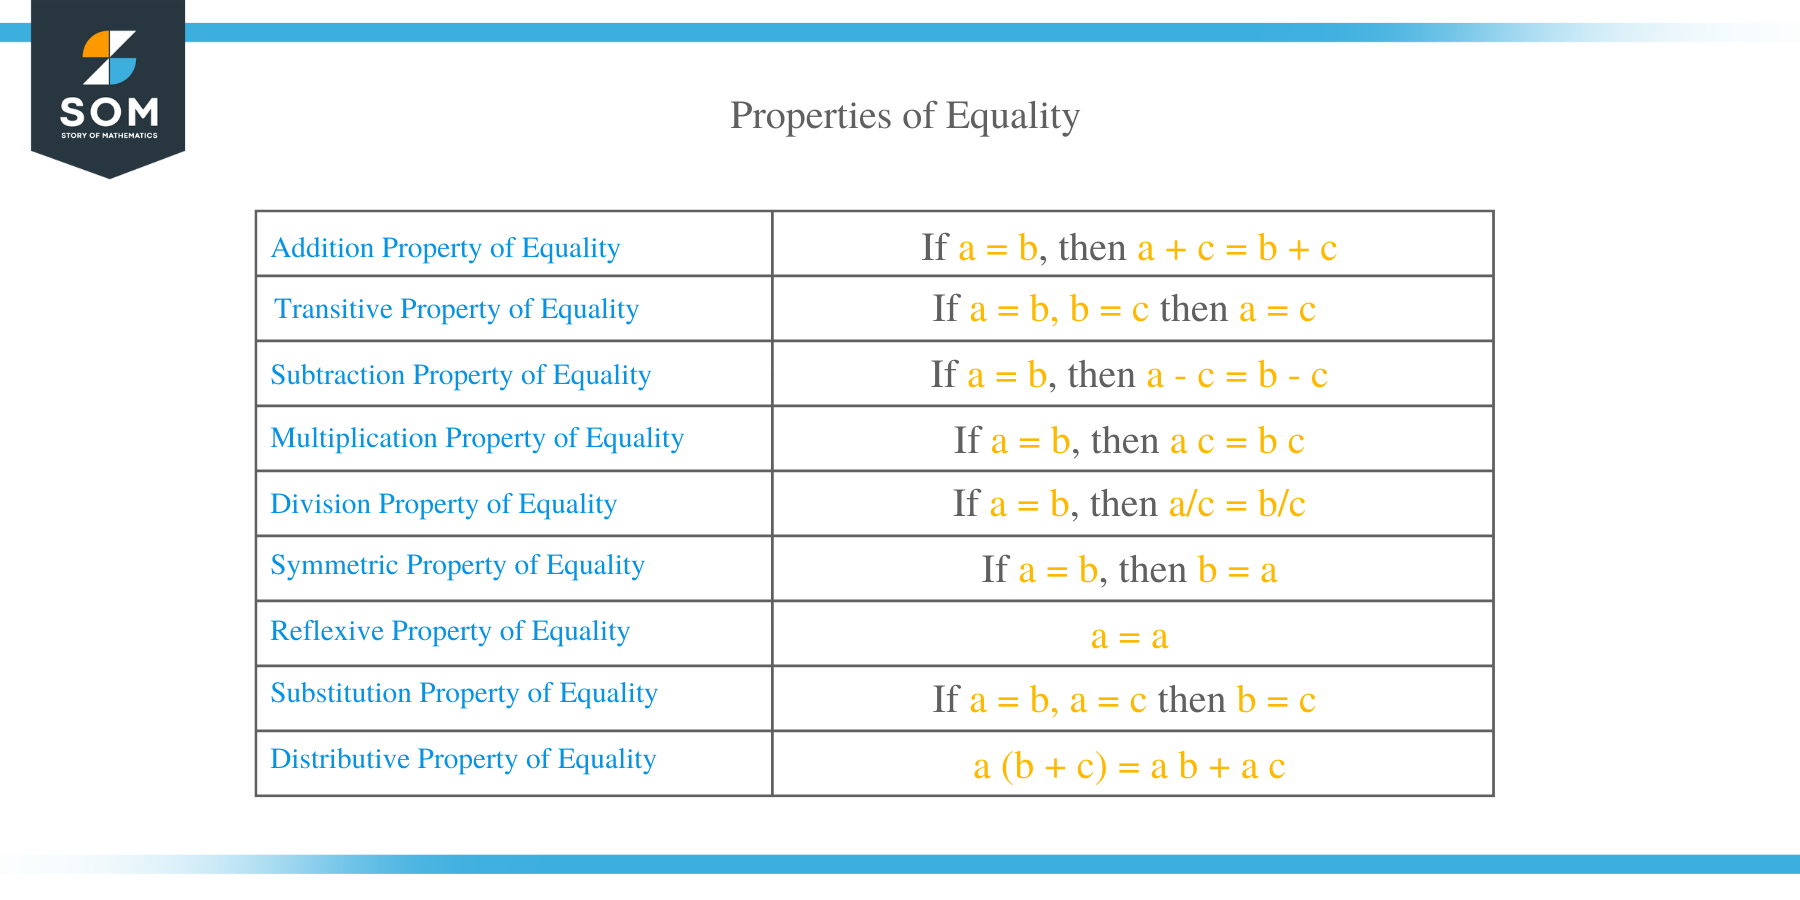 Division Property of Equality, Definition & Examples - Lesson